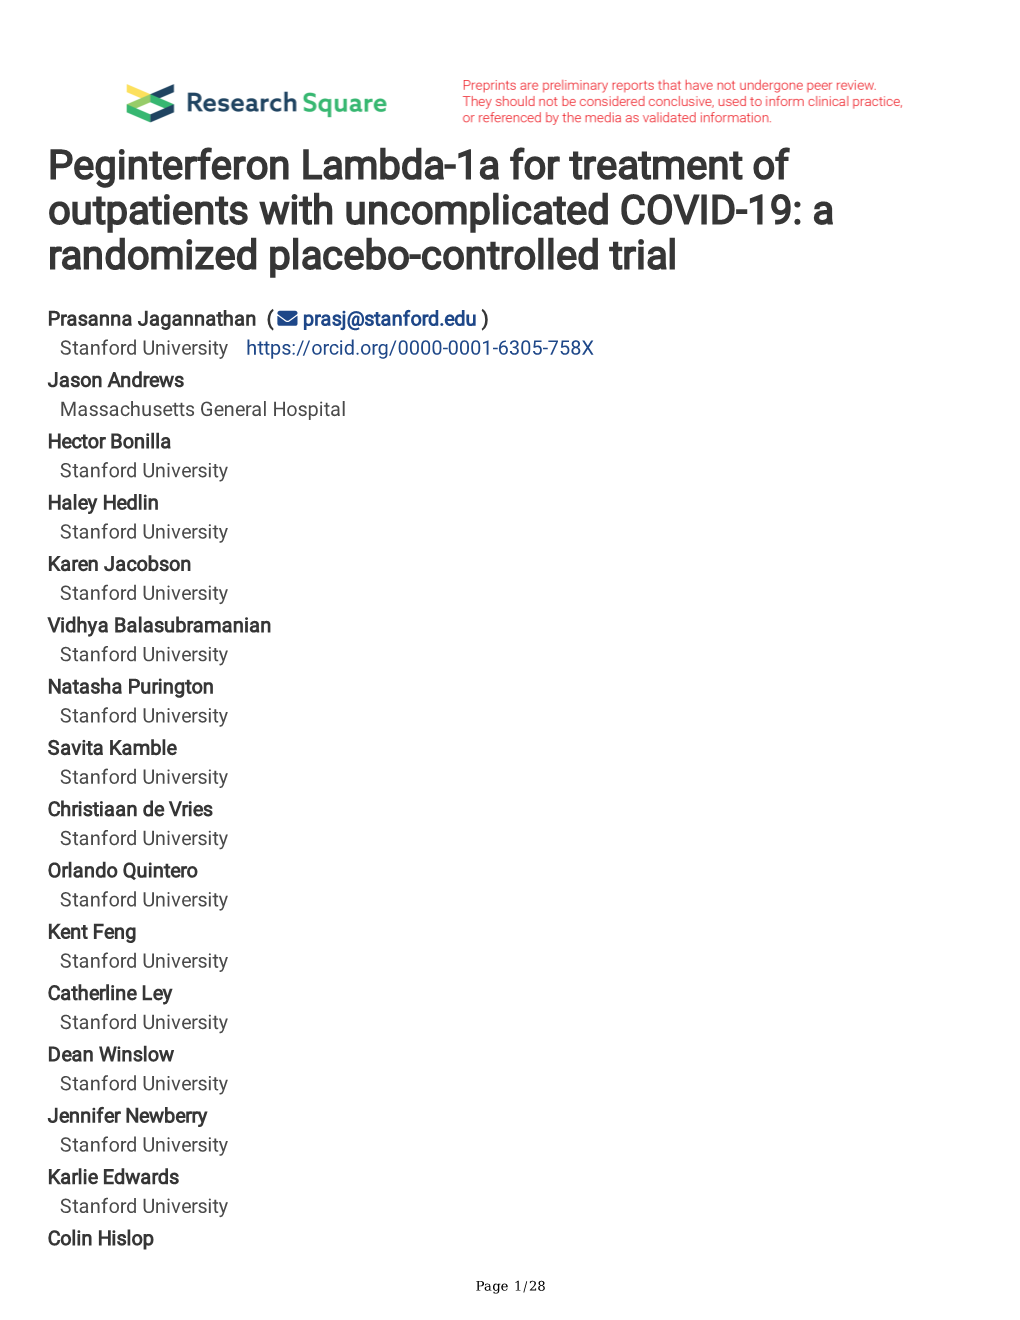 Peginterferon Lambda-1A for Treatment of Outpatients with Uncomplicated COVID-19: a Randomized Placebo-Controlled Trial